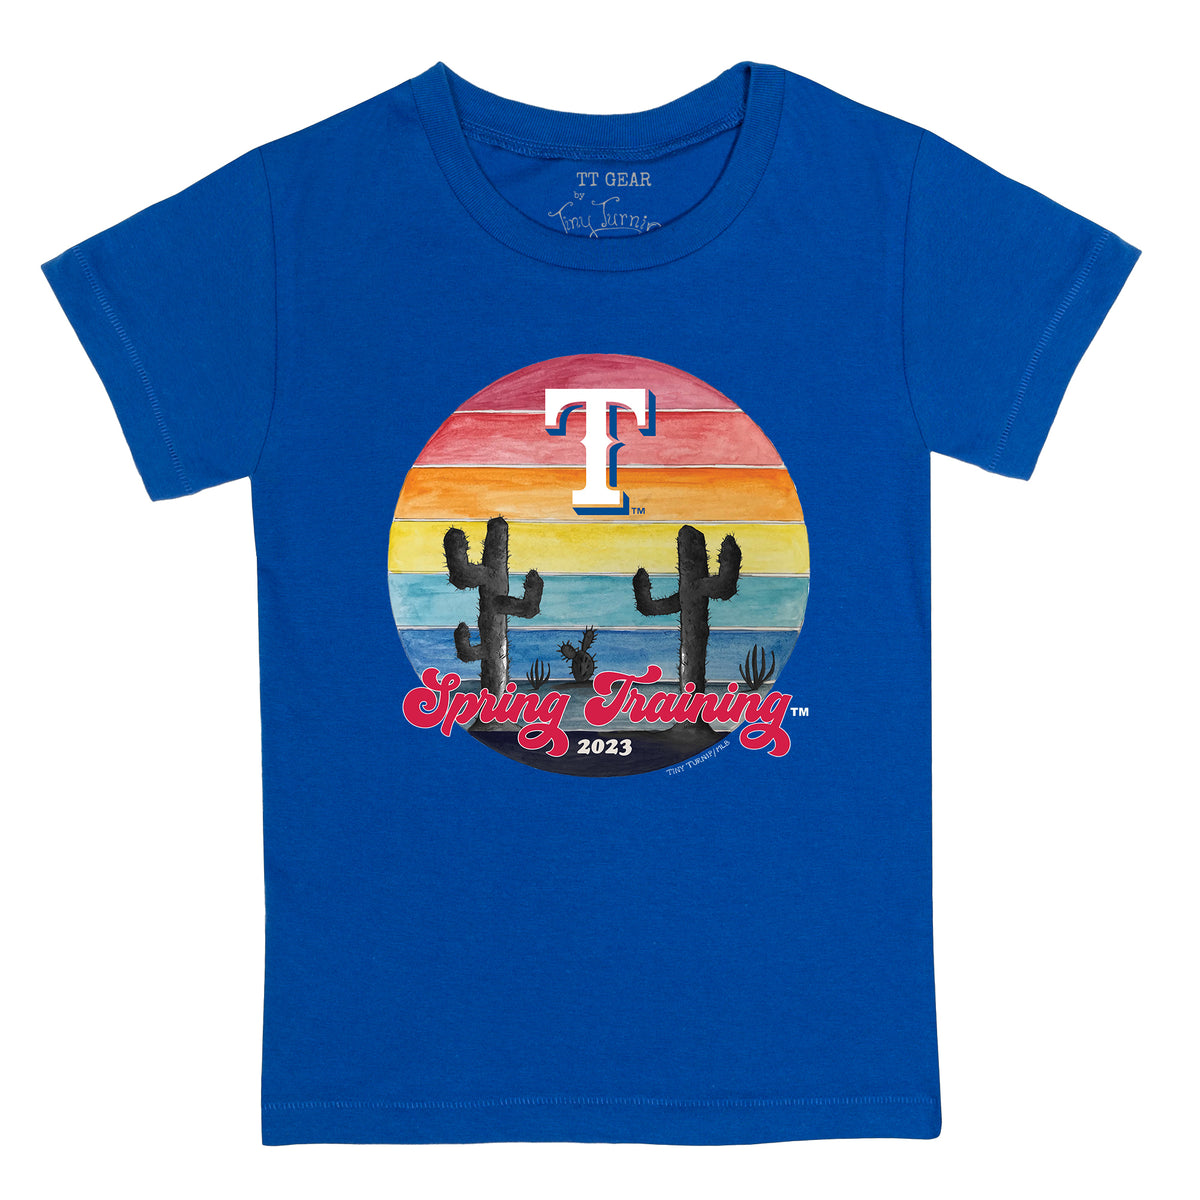 Youth Tiny Turnip White Texas Rangers Fastball T-Shirt Size: Extra Large